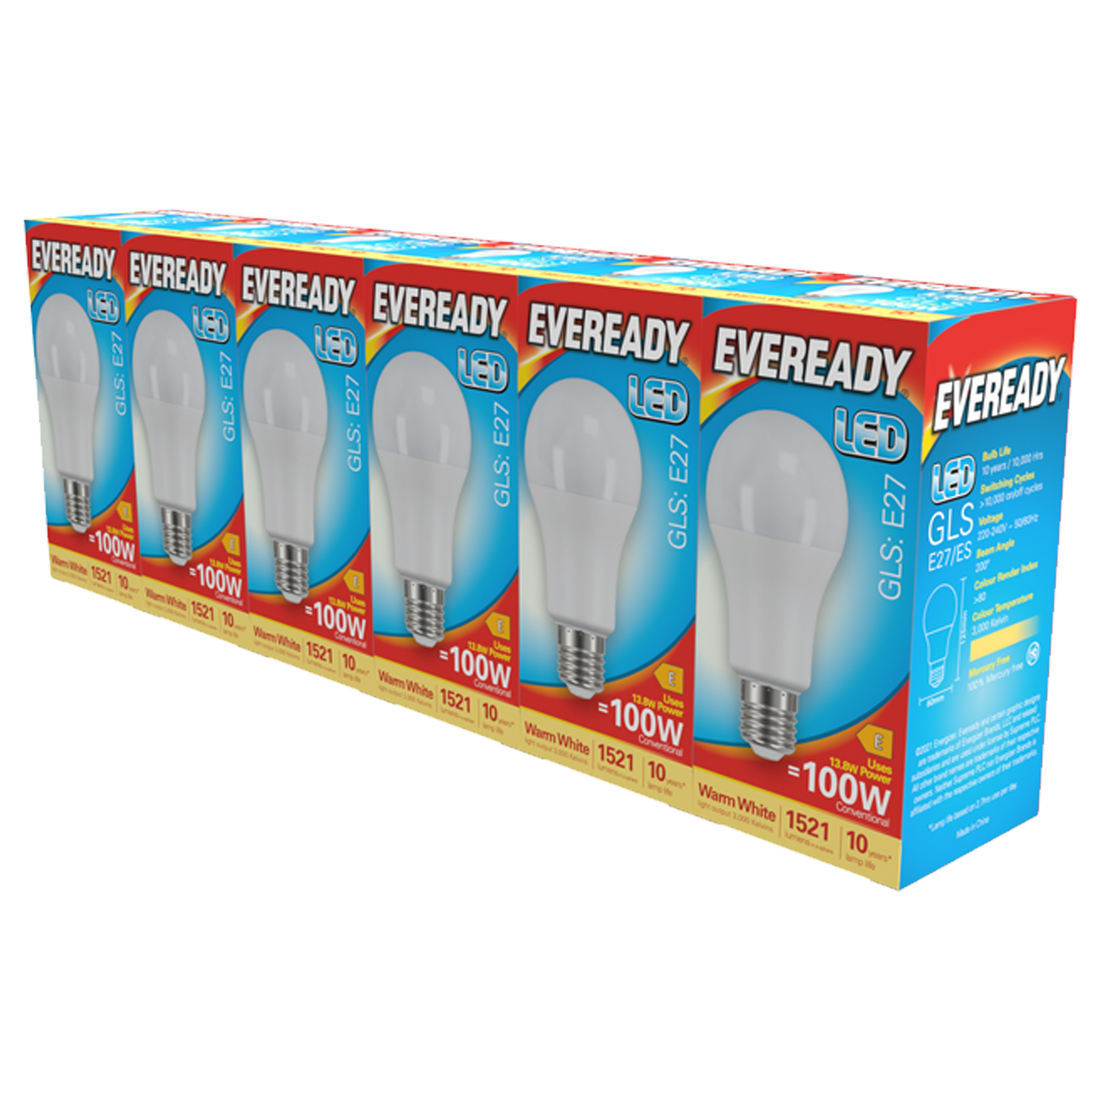 New In - EVEREADY LED 5+1 multipack - Limited Edition